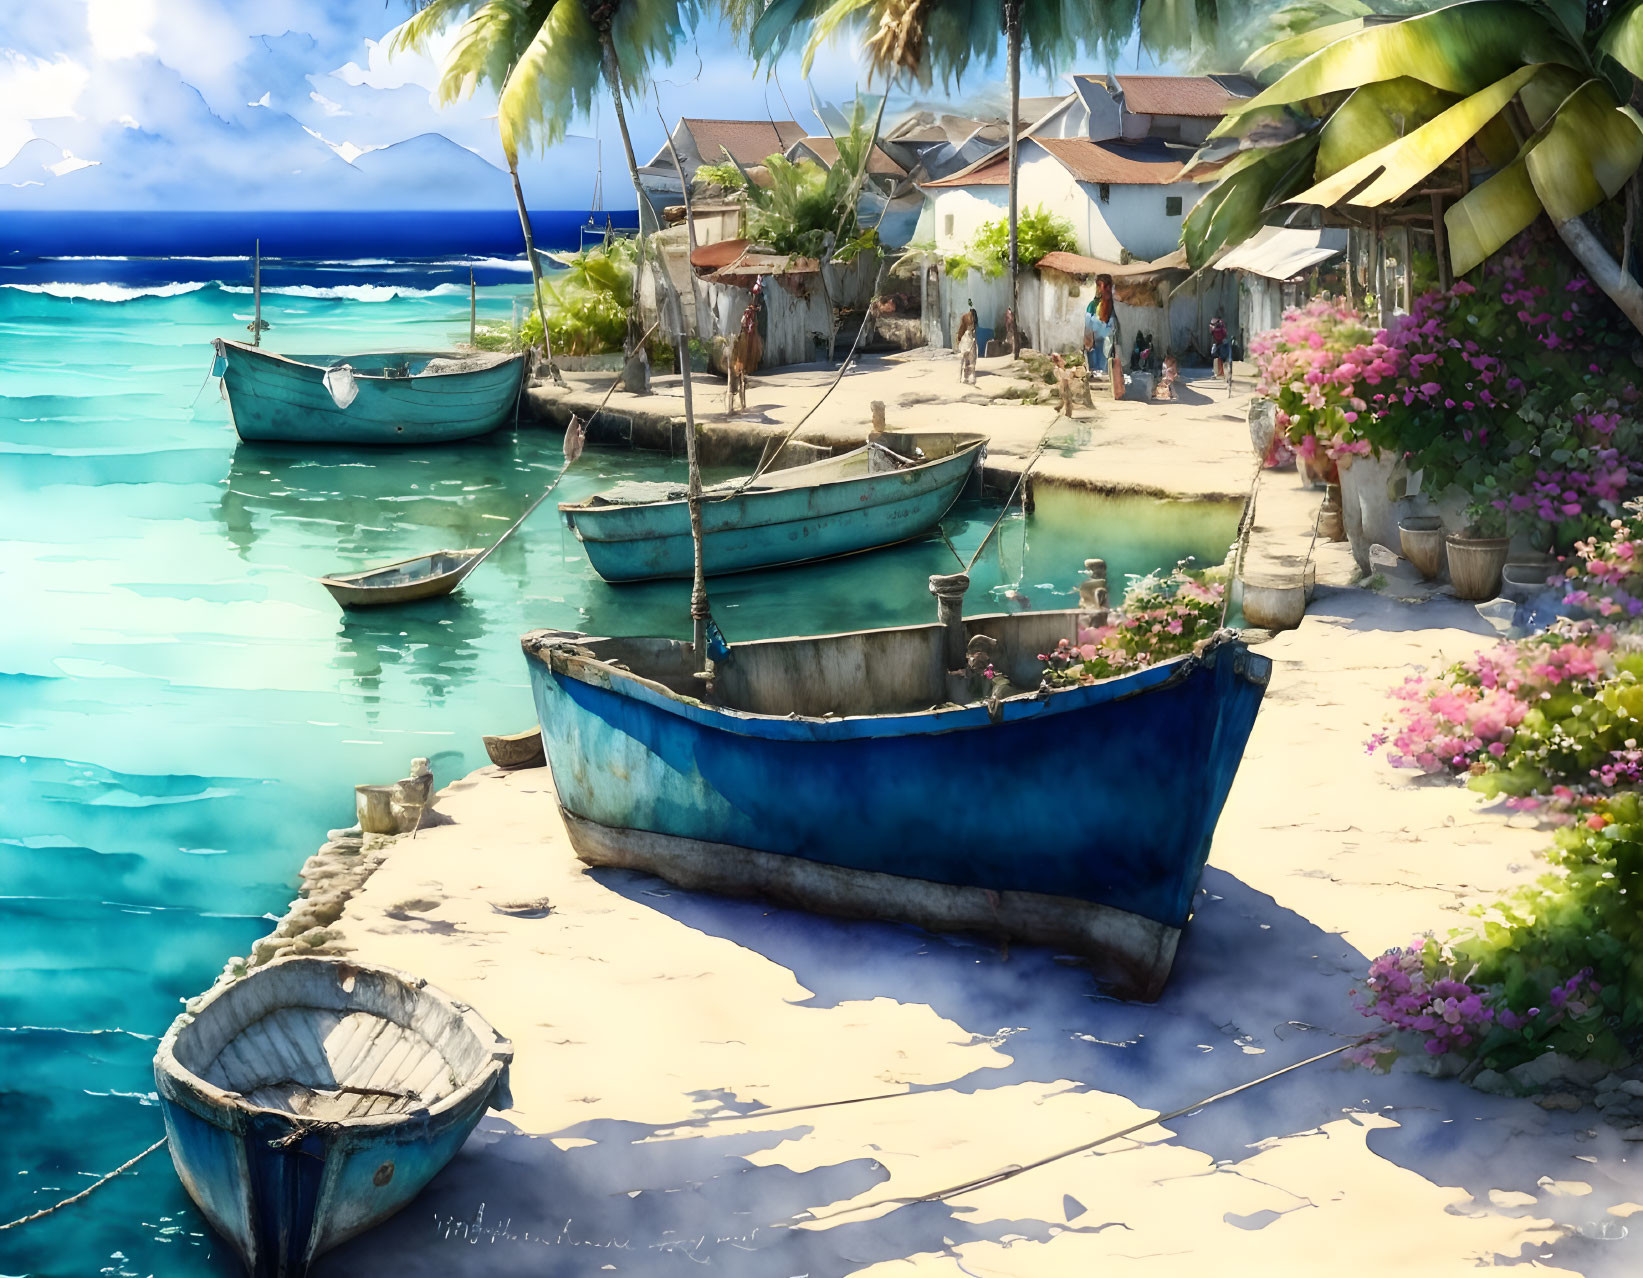 Tropical beach scene with wooden boats, palm trees, and colorful flowers